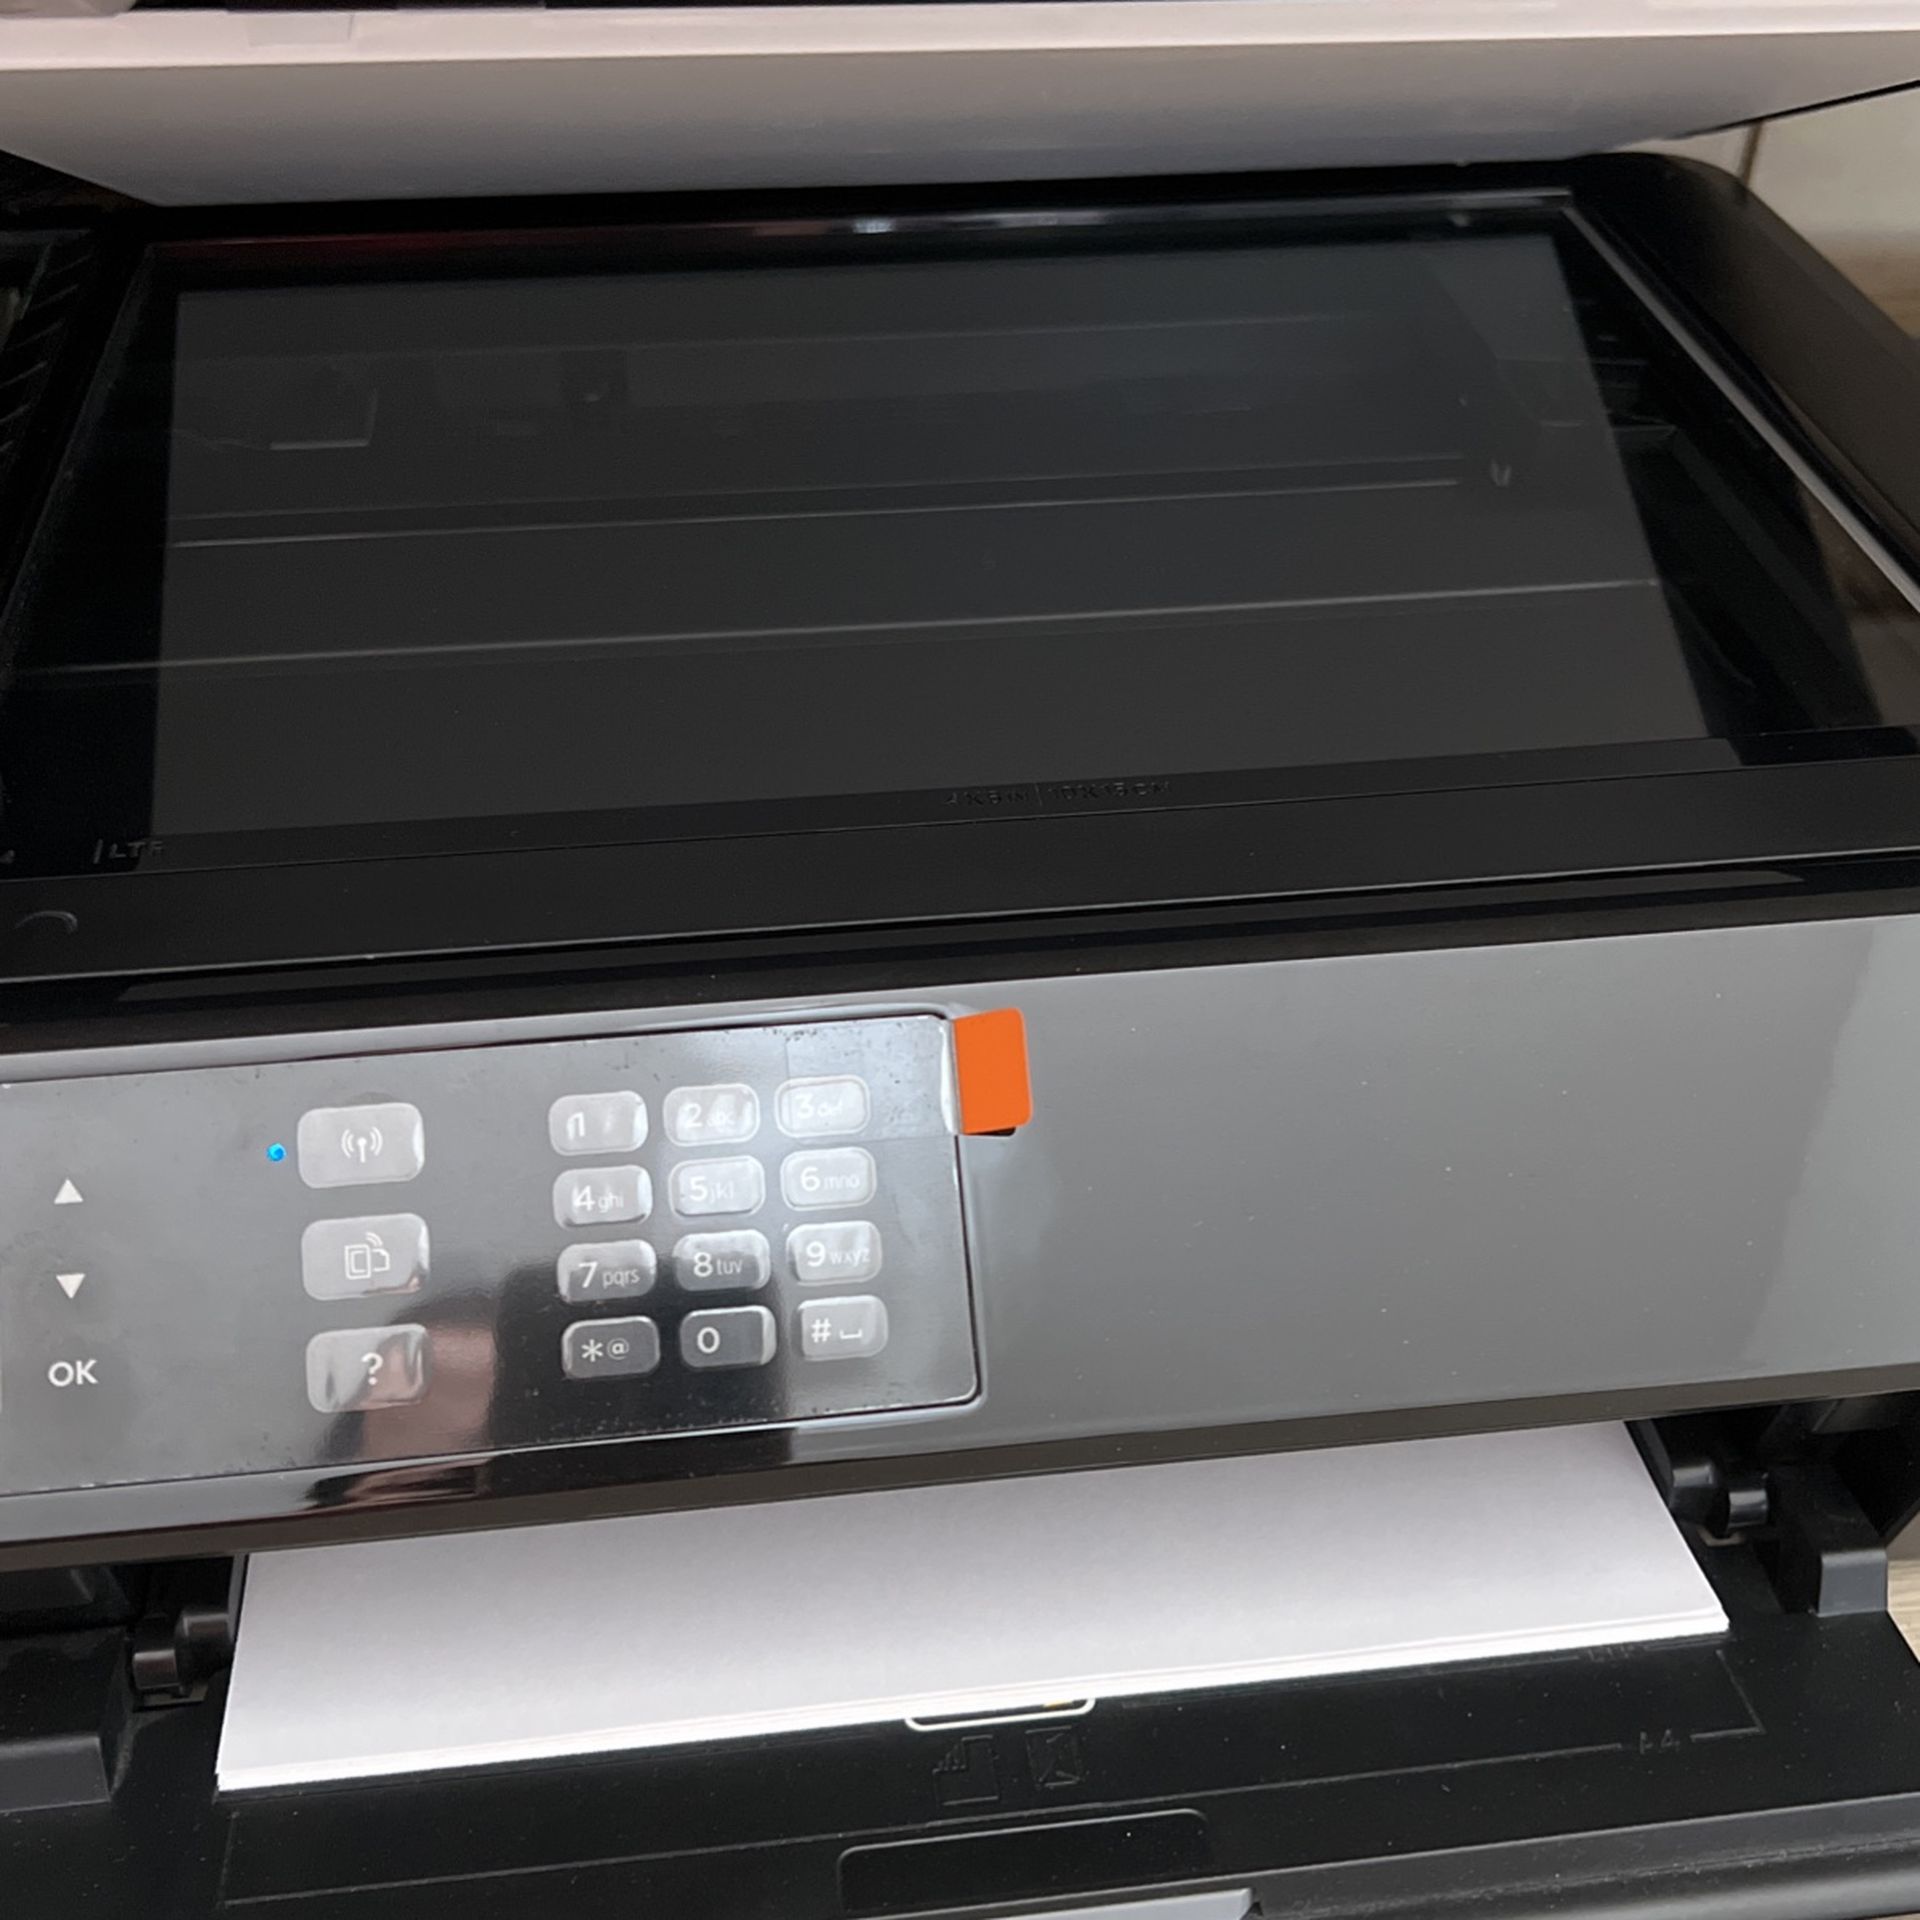 Hp Office Jet 4635 Printer Fax Scan And Copy For Sale In Los Angeles Ca Offerup 0267